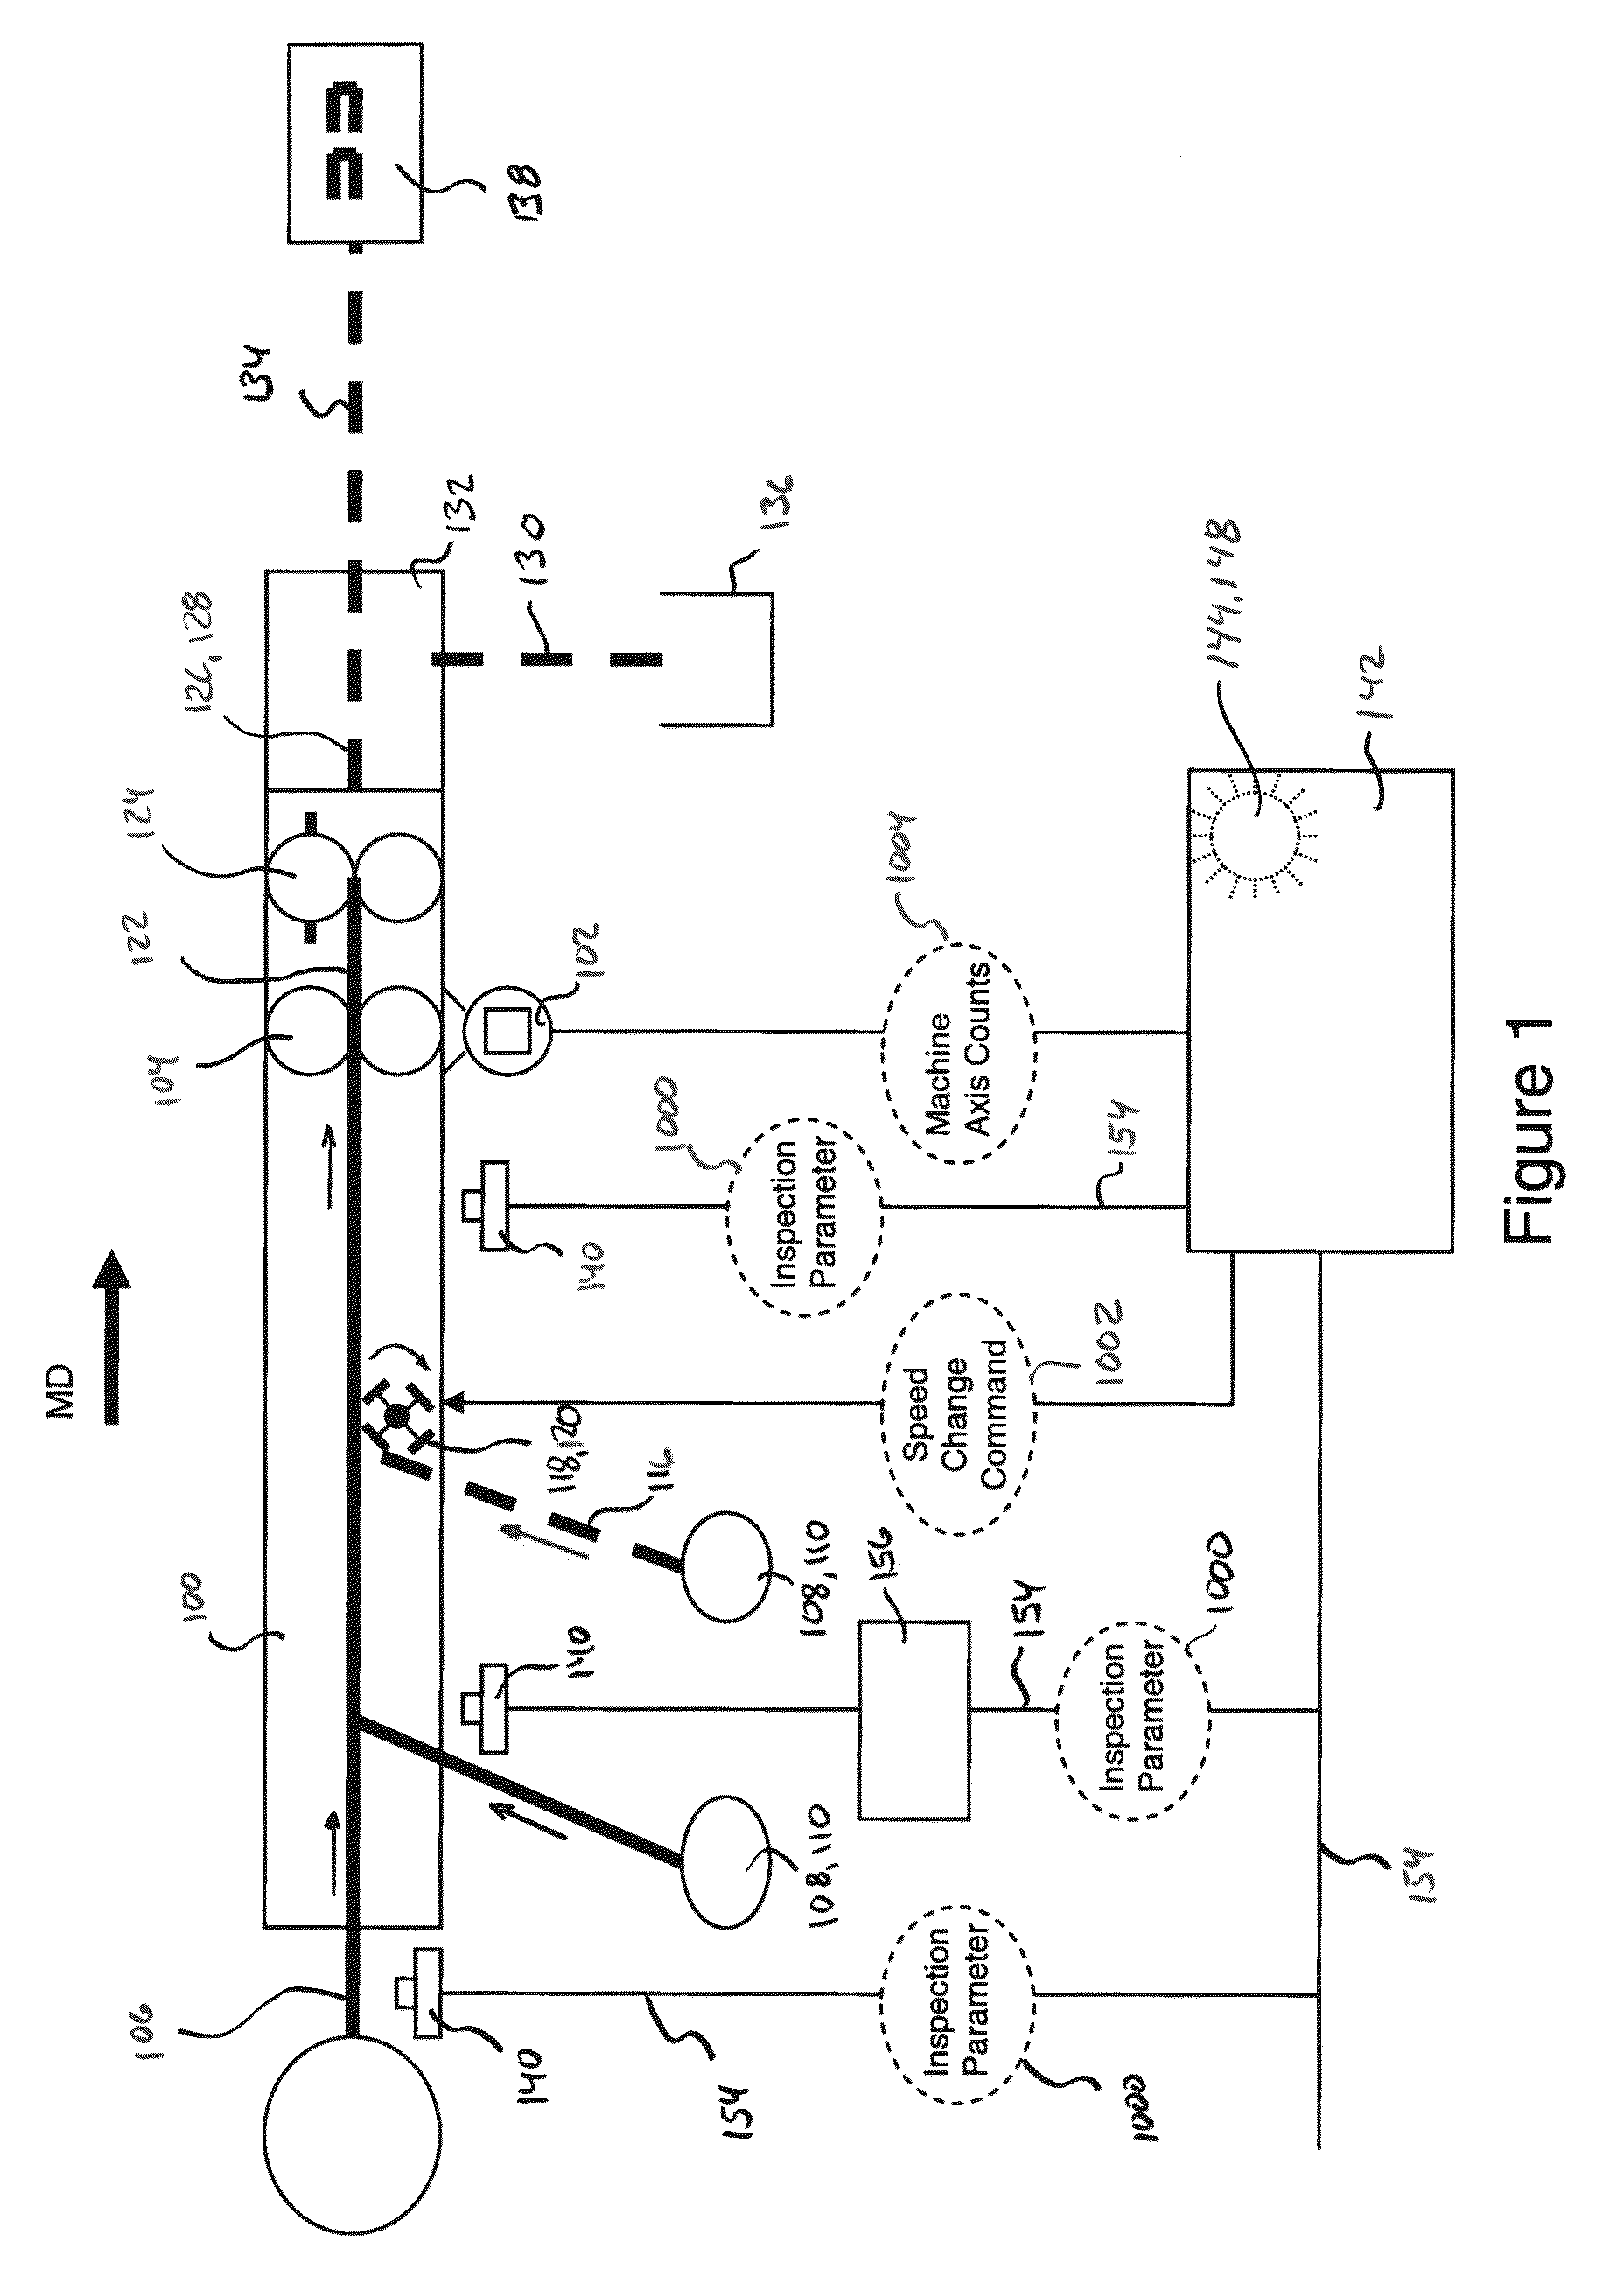 Systems and methods for controlling phasing of advancing substrates in absorbent article converting lines